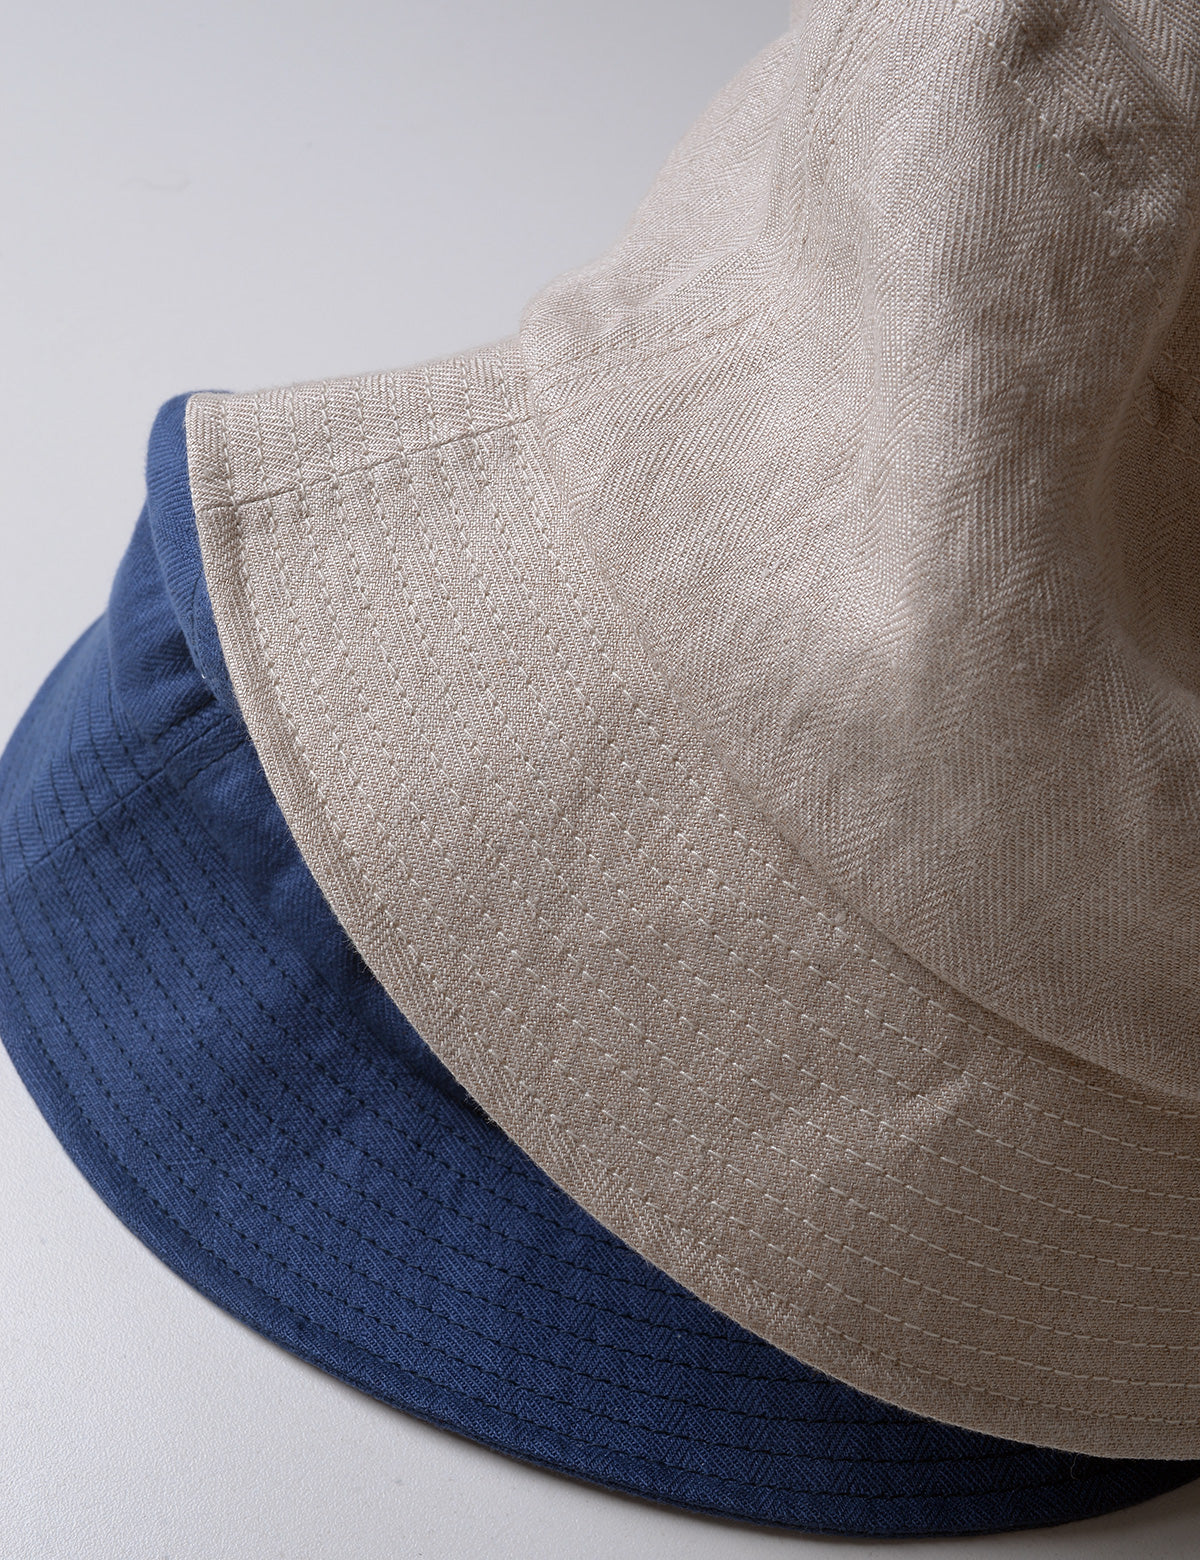 Detail of two Cableami French Linen Bucket Hats showing fabric weave